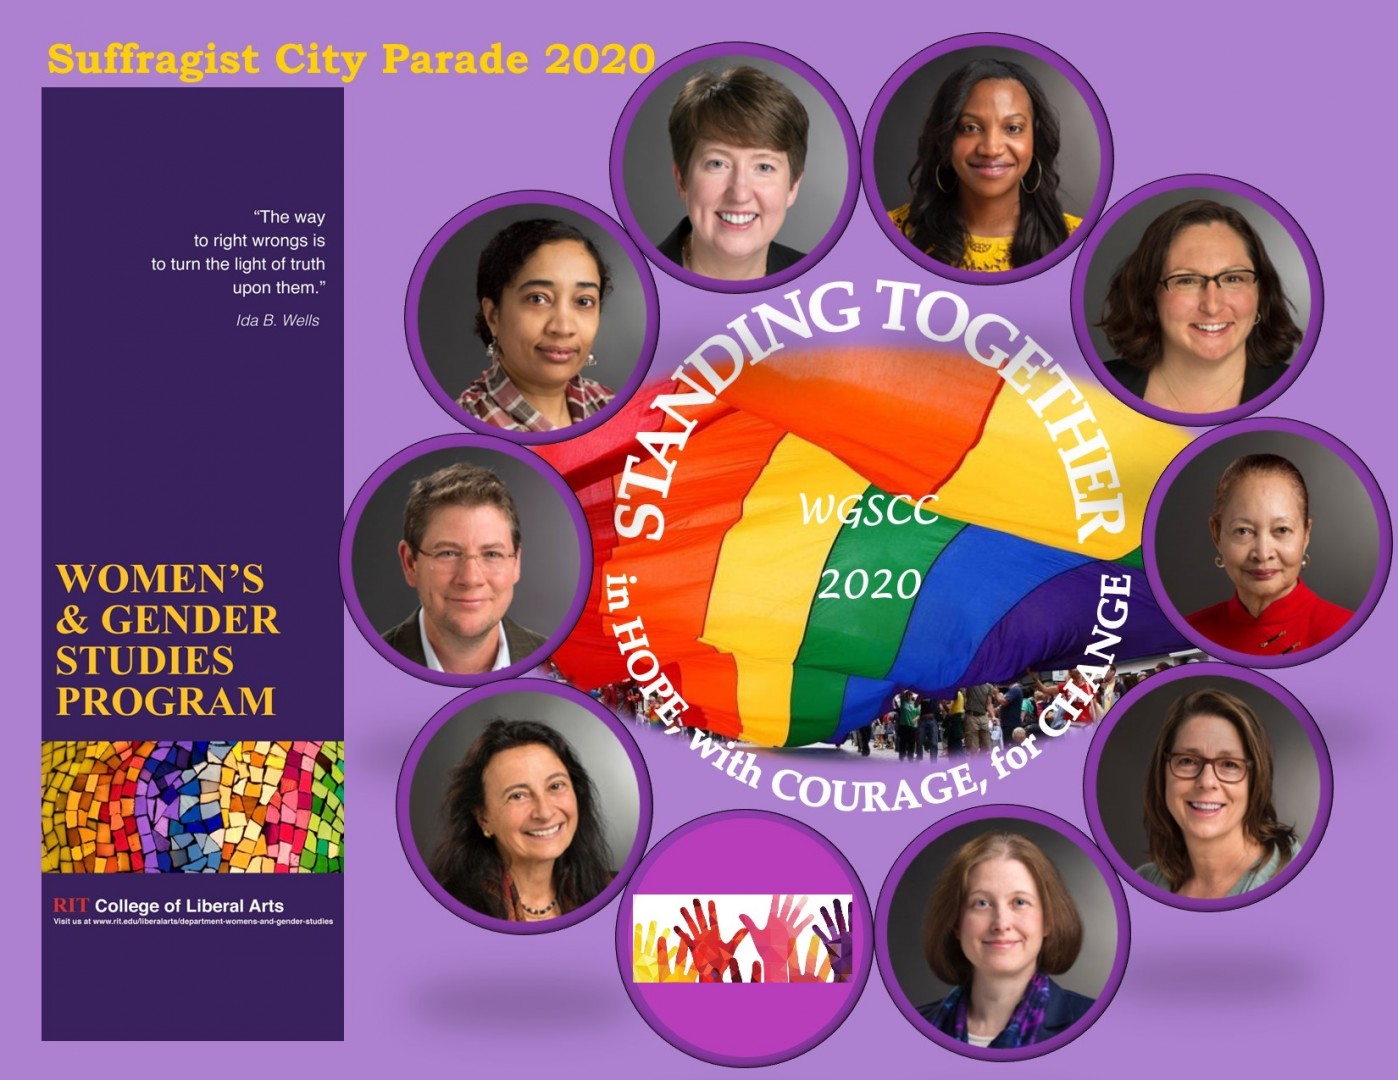 The CLA WGS Program will attend the virtual City Suffragist Parade 2020 on September 12, starting at 10:30 AM.